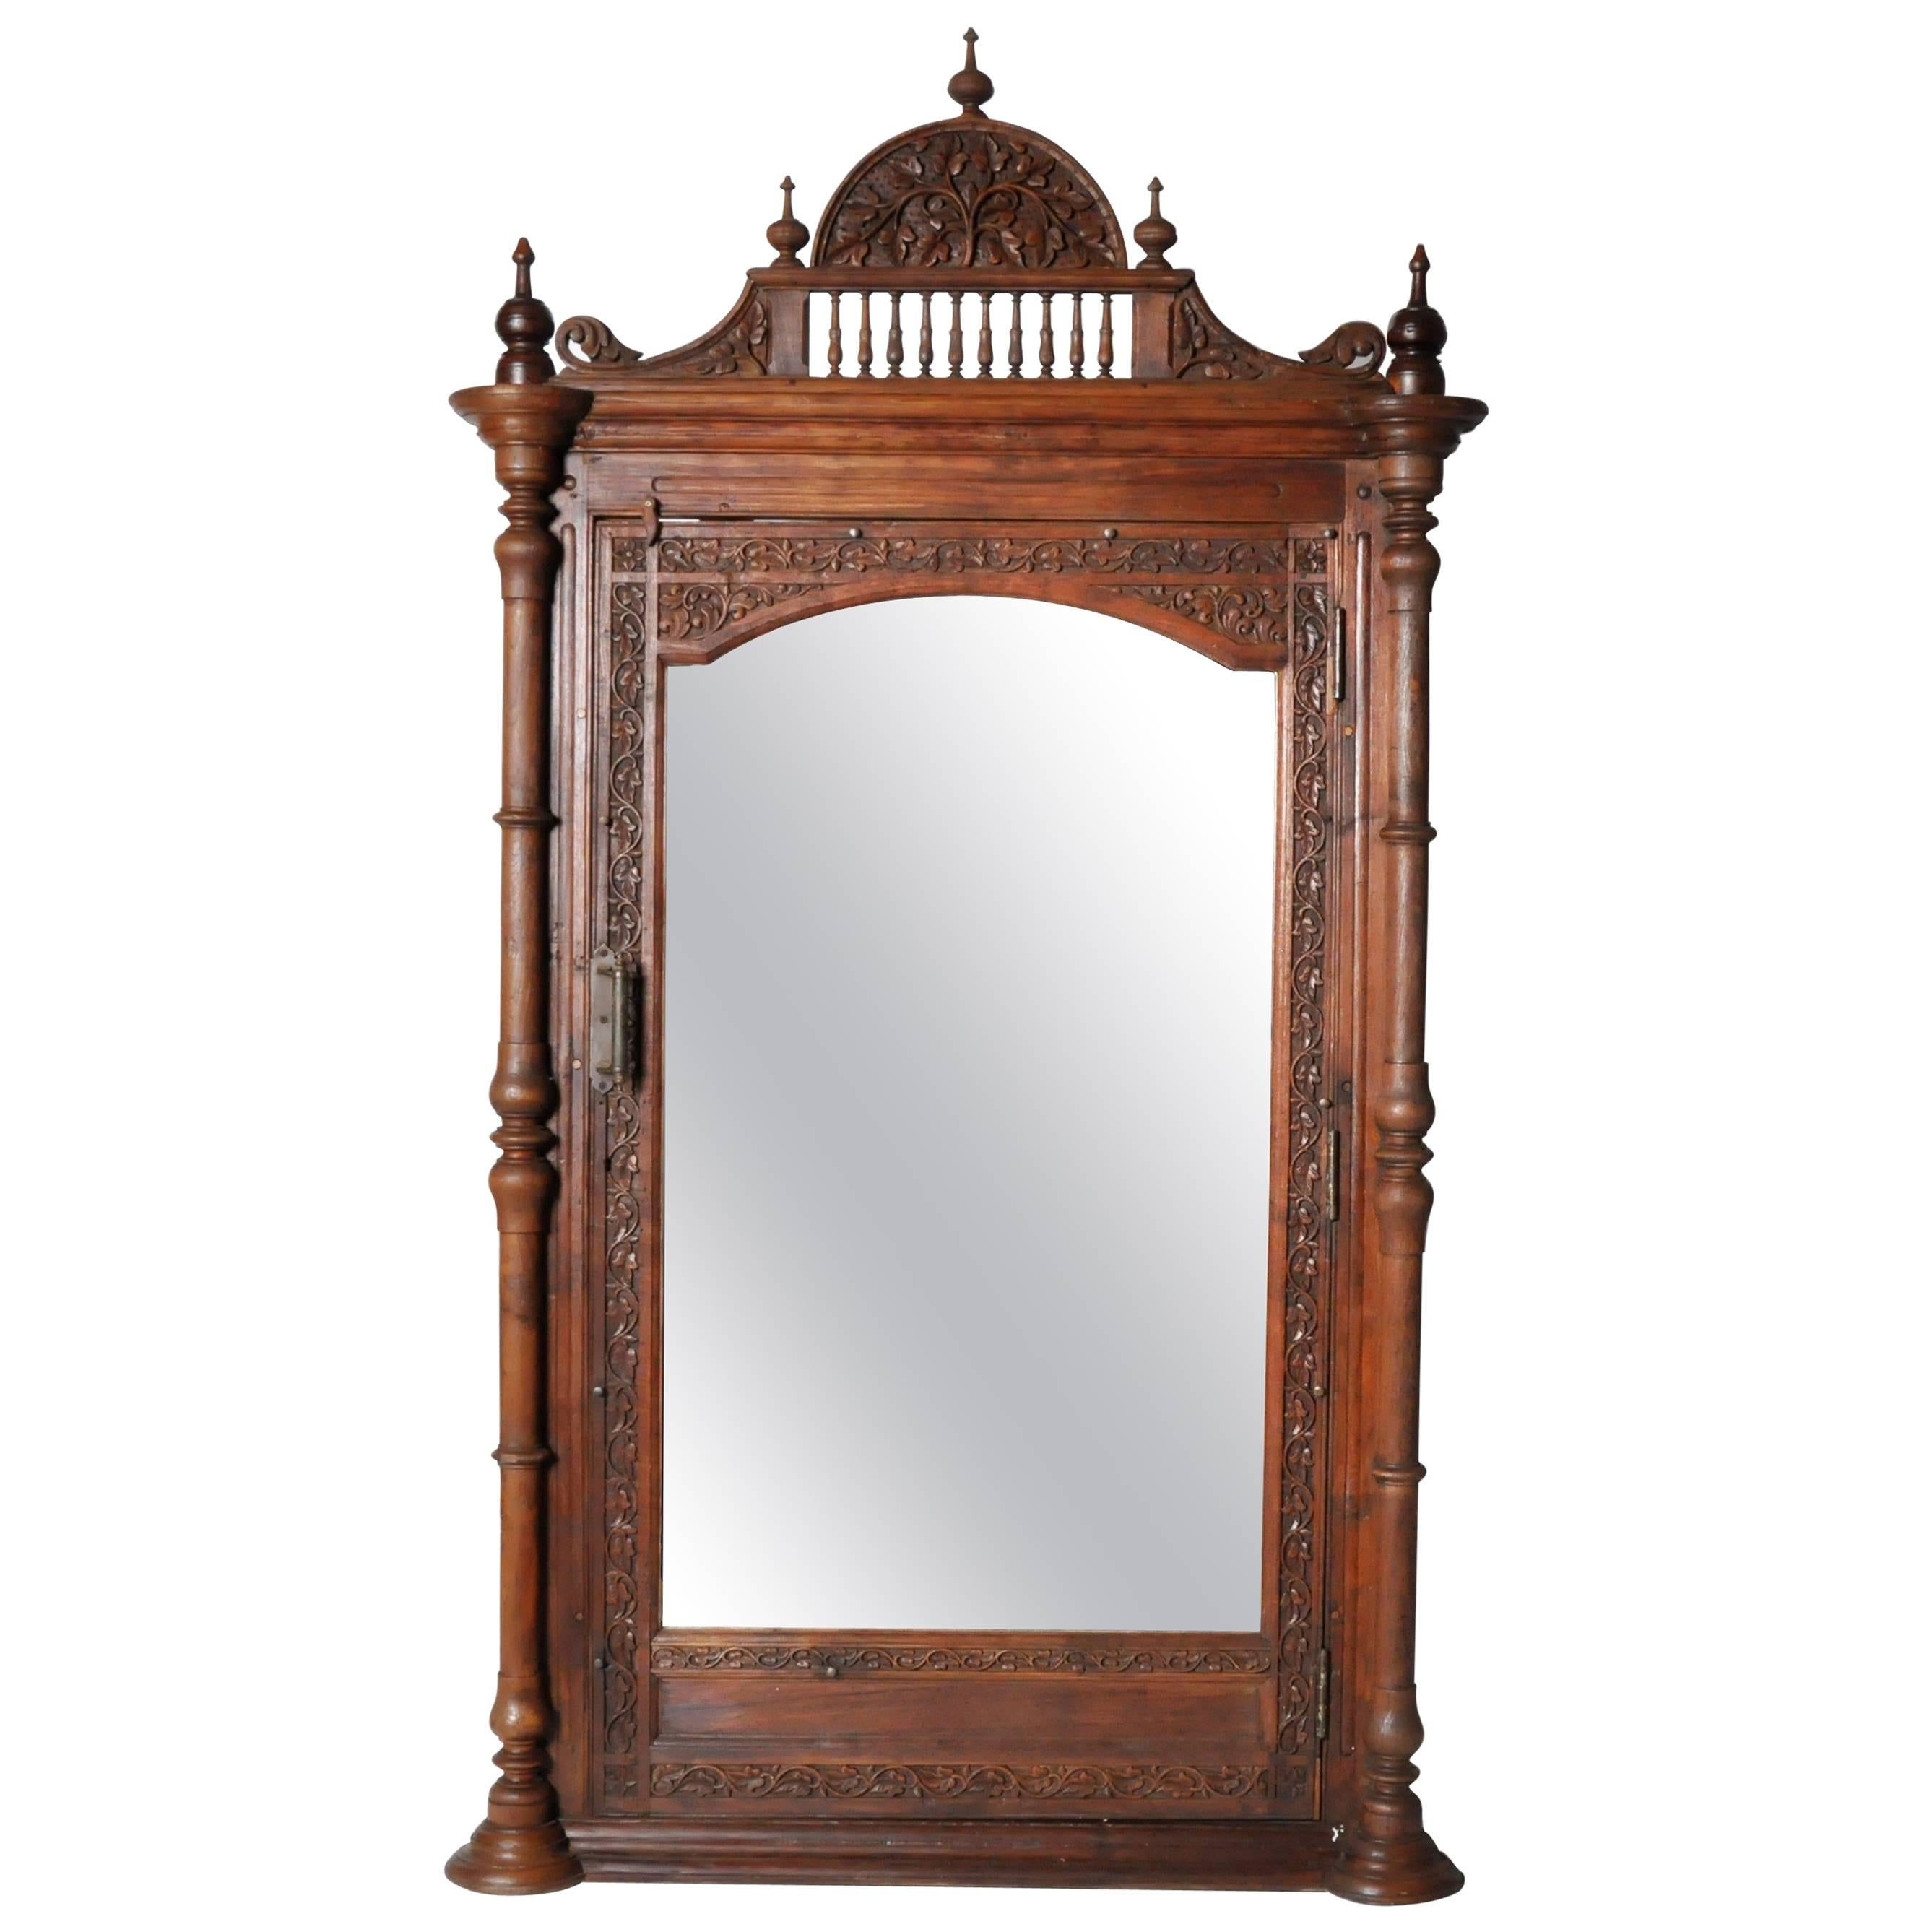 Carved British Colonial Mirror